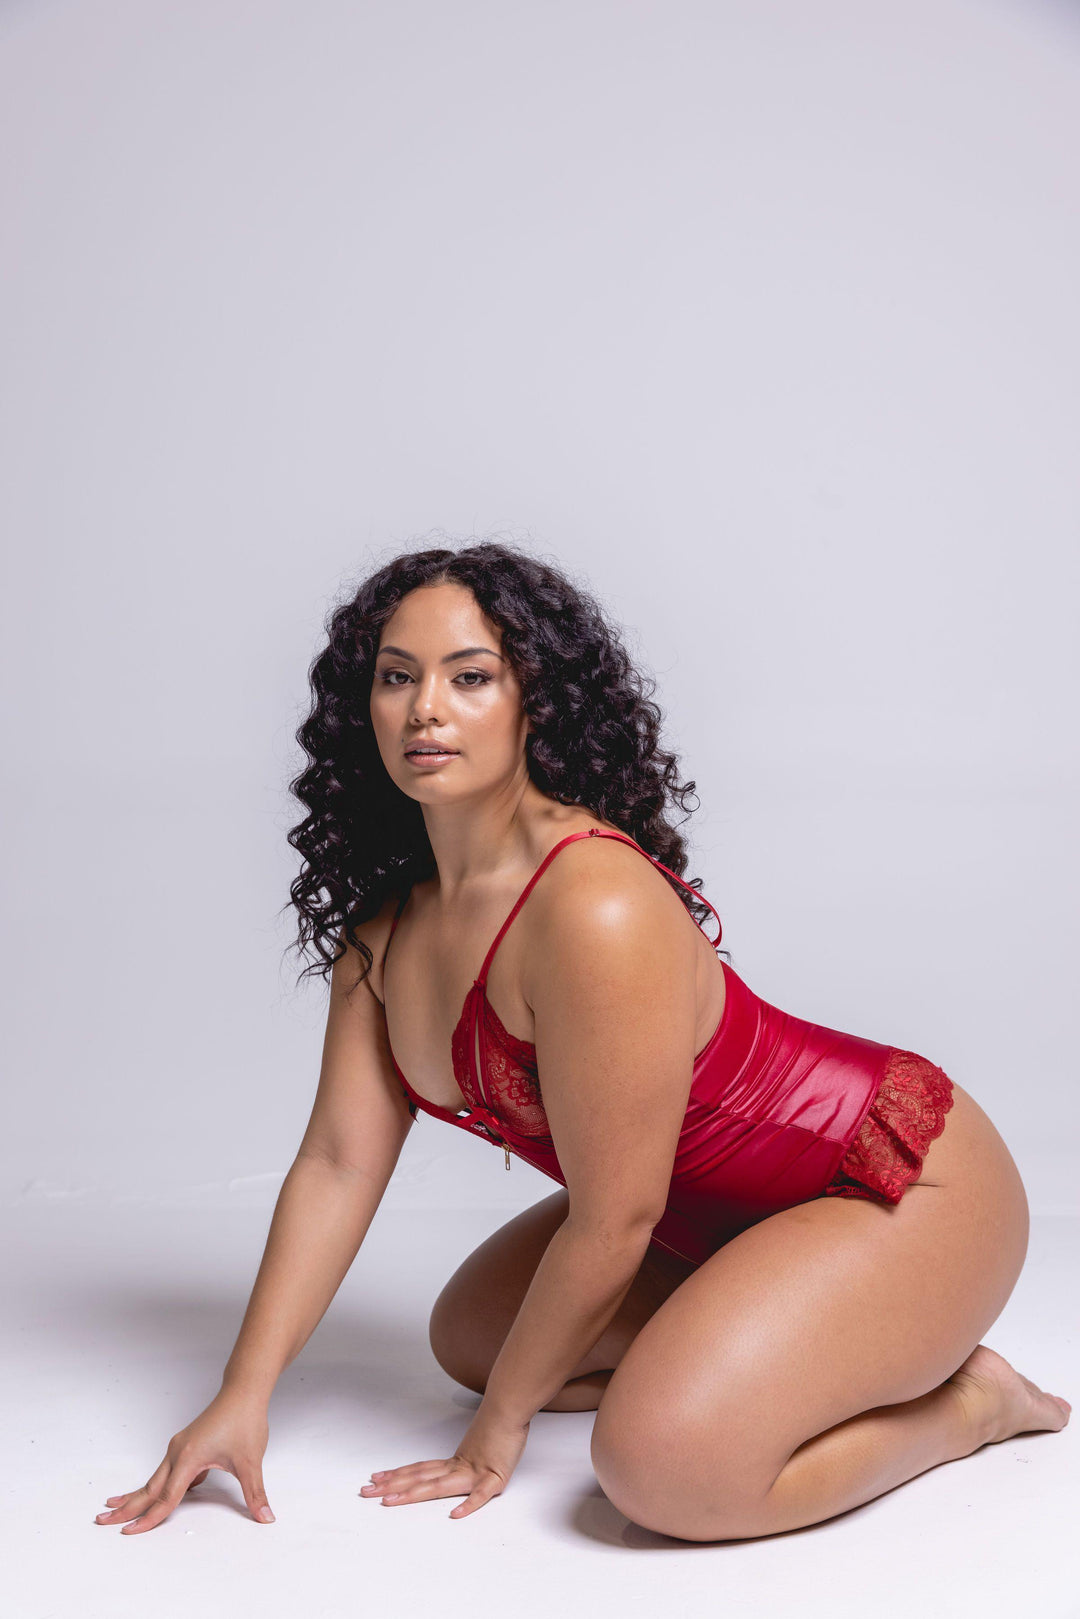 Madame Teese Red Vegan Leather Teddy - $68.00 - Bodysuit - Naked Curve